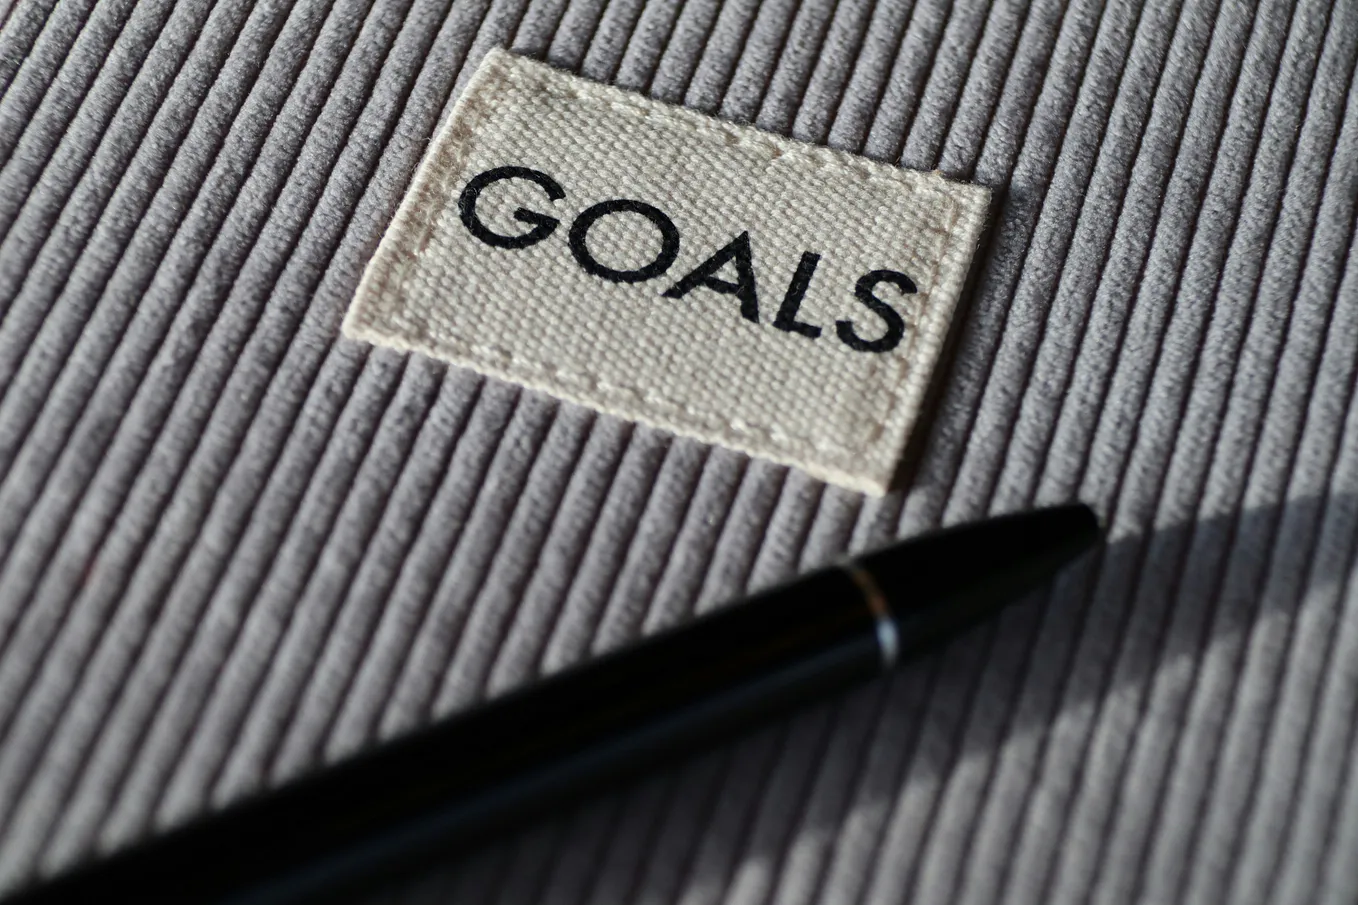 Why You Should NOT Set Goals To Be in Great Shape